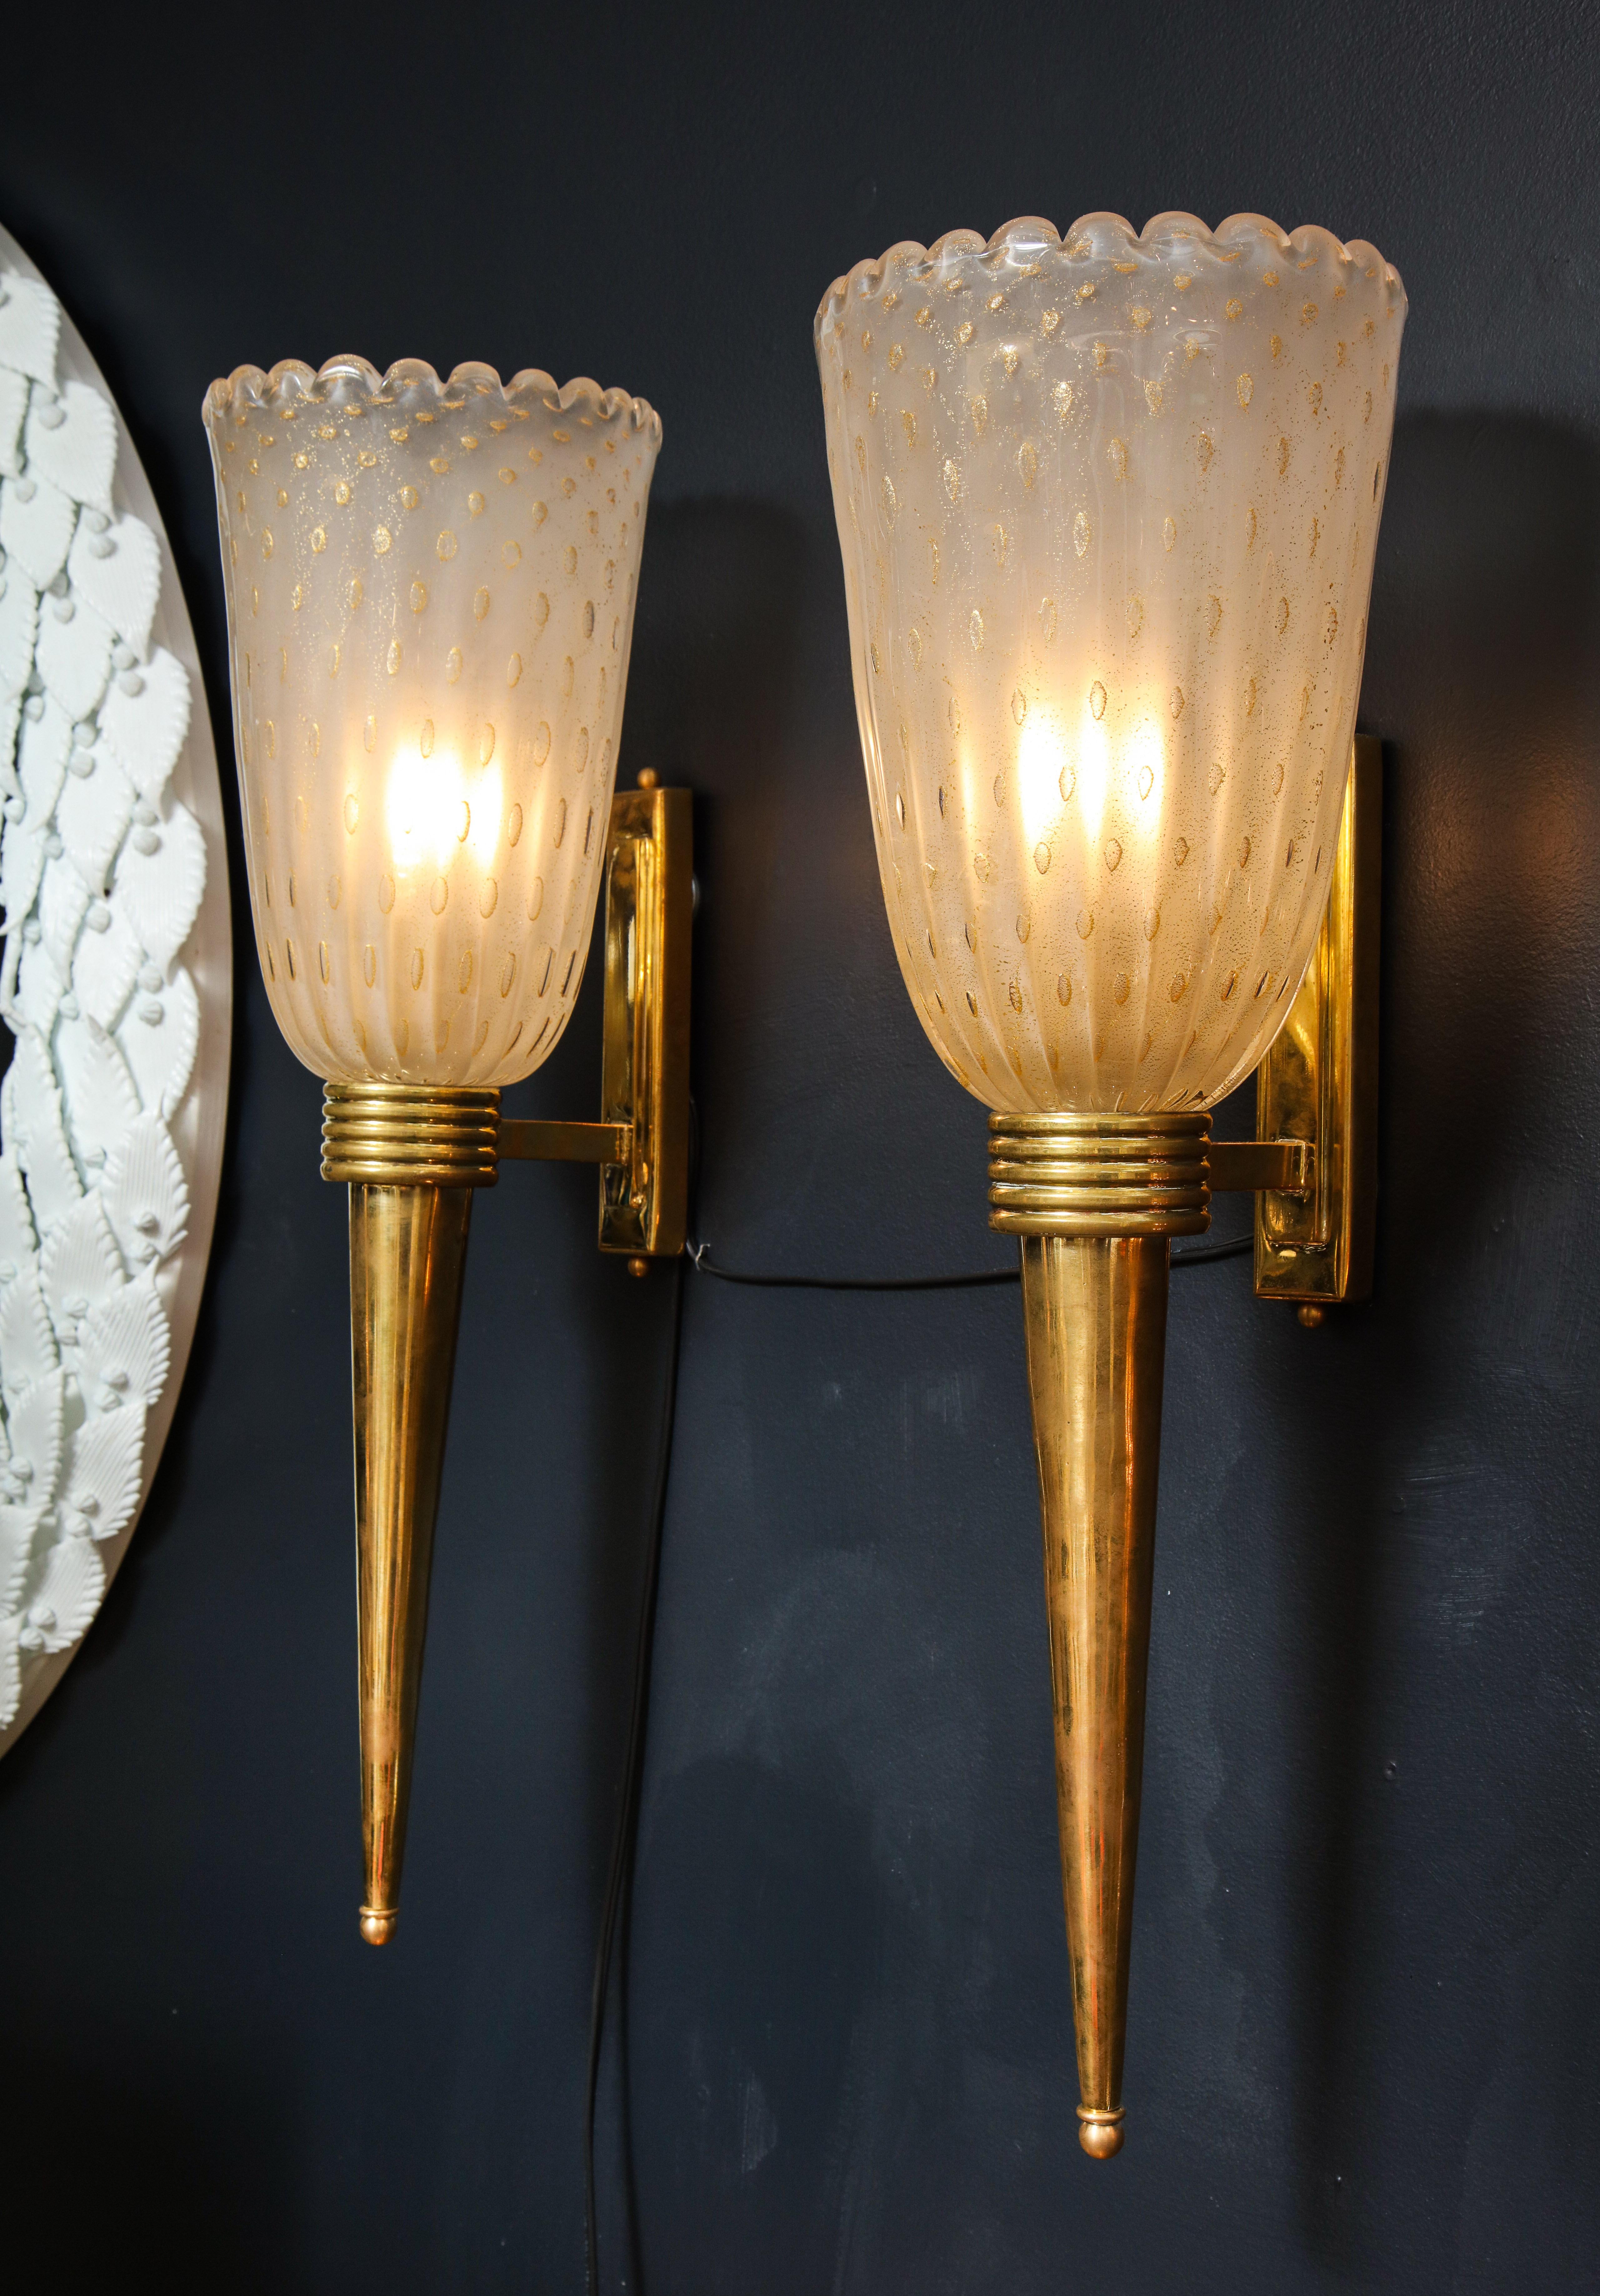 Handblown pair of torch-like sconces consisting of a ivory infused with 24-karat gold flecks. 